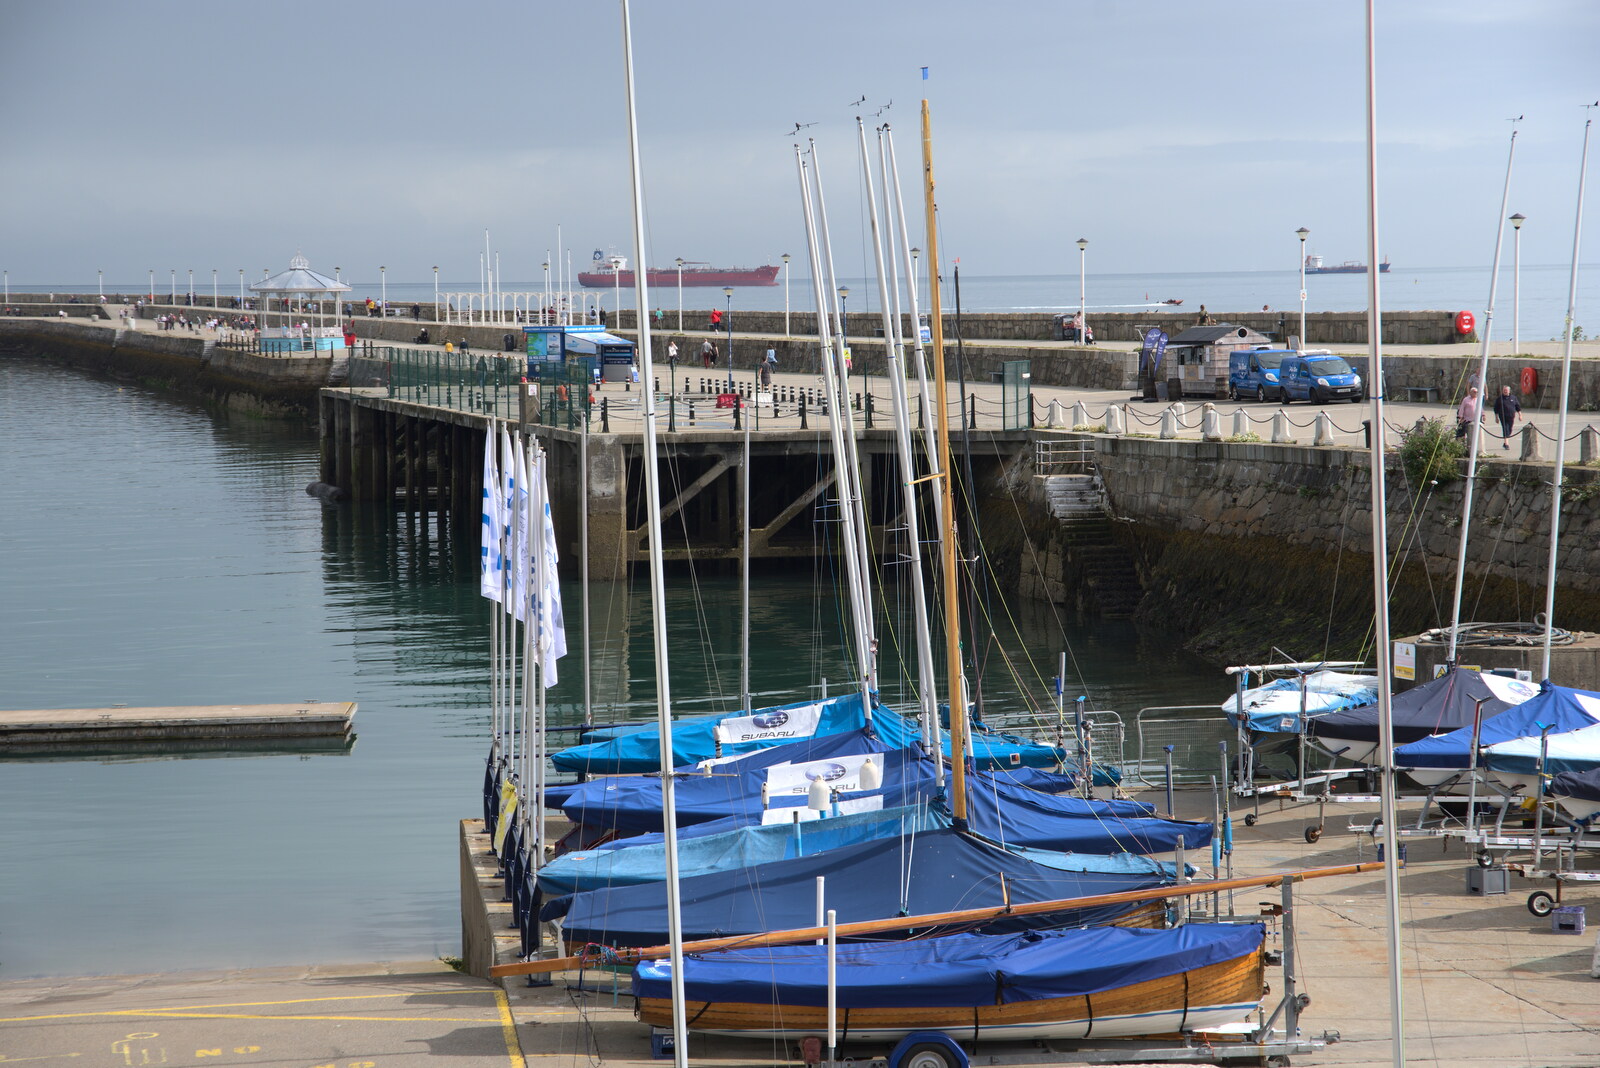 It's serene down at the East Pier from Manorhamilton and the Street Art of Dún Laoghaire, Ireland - 15th August 2021